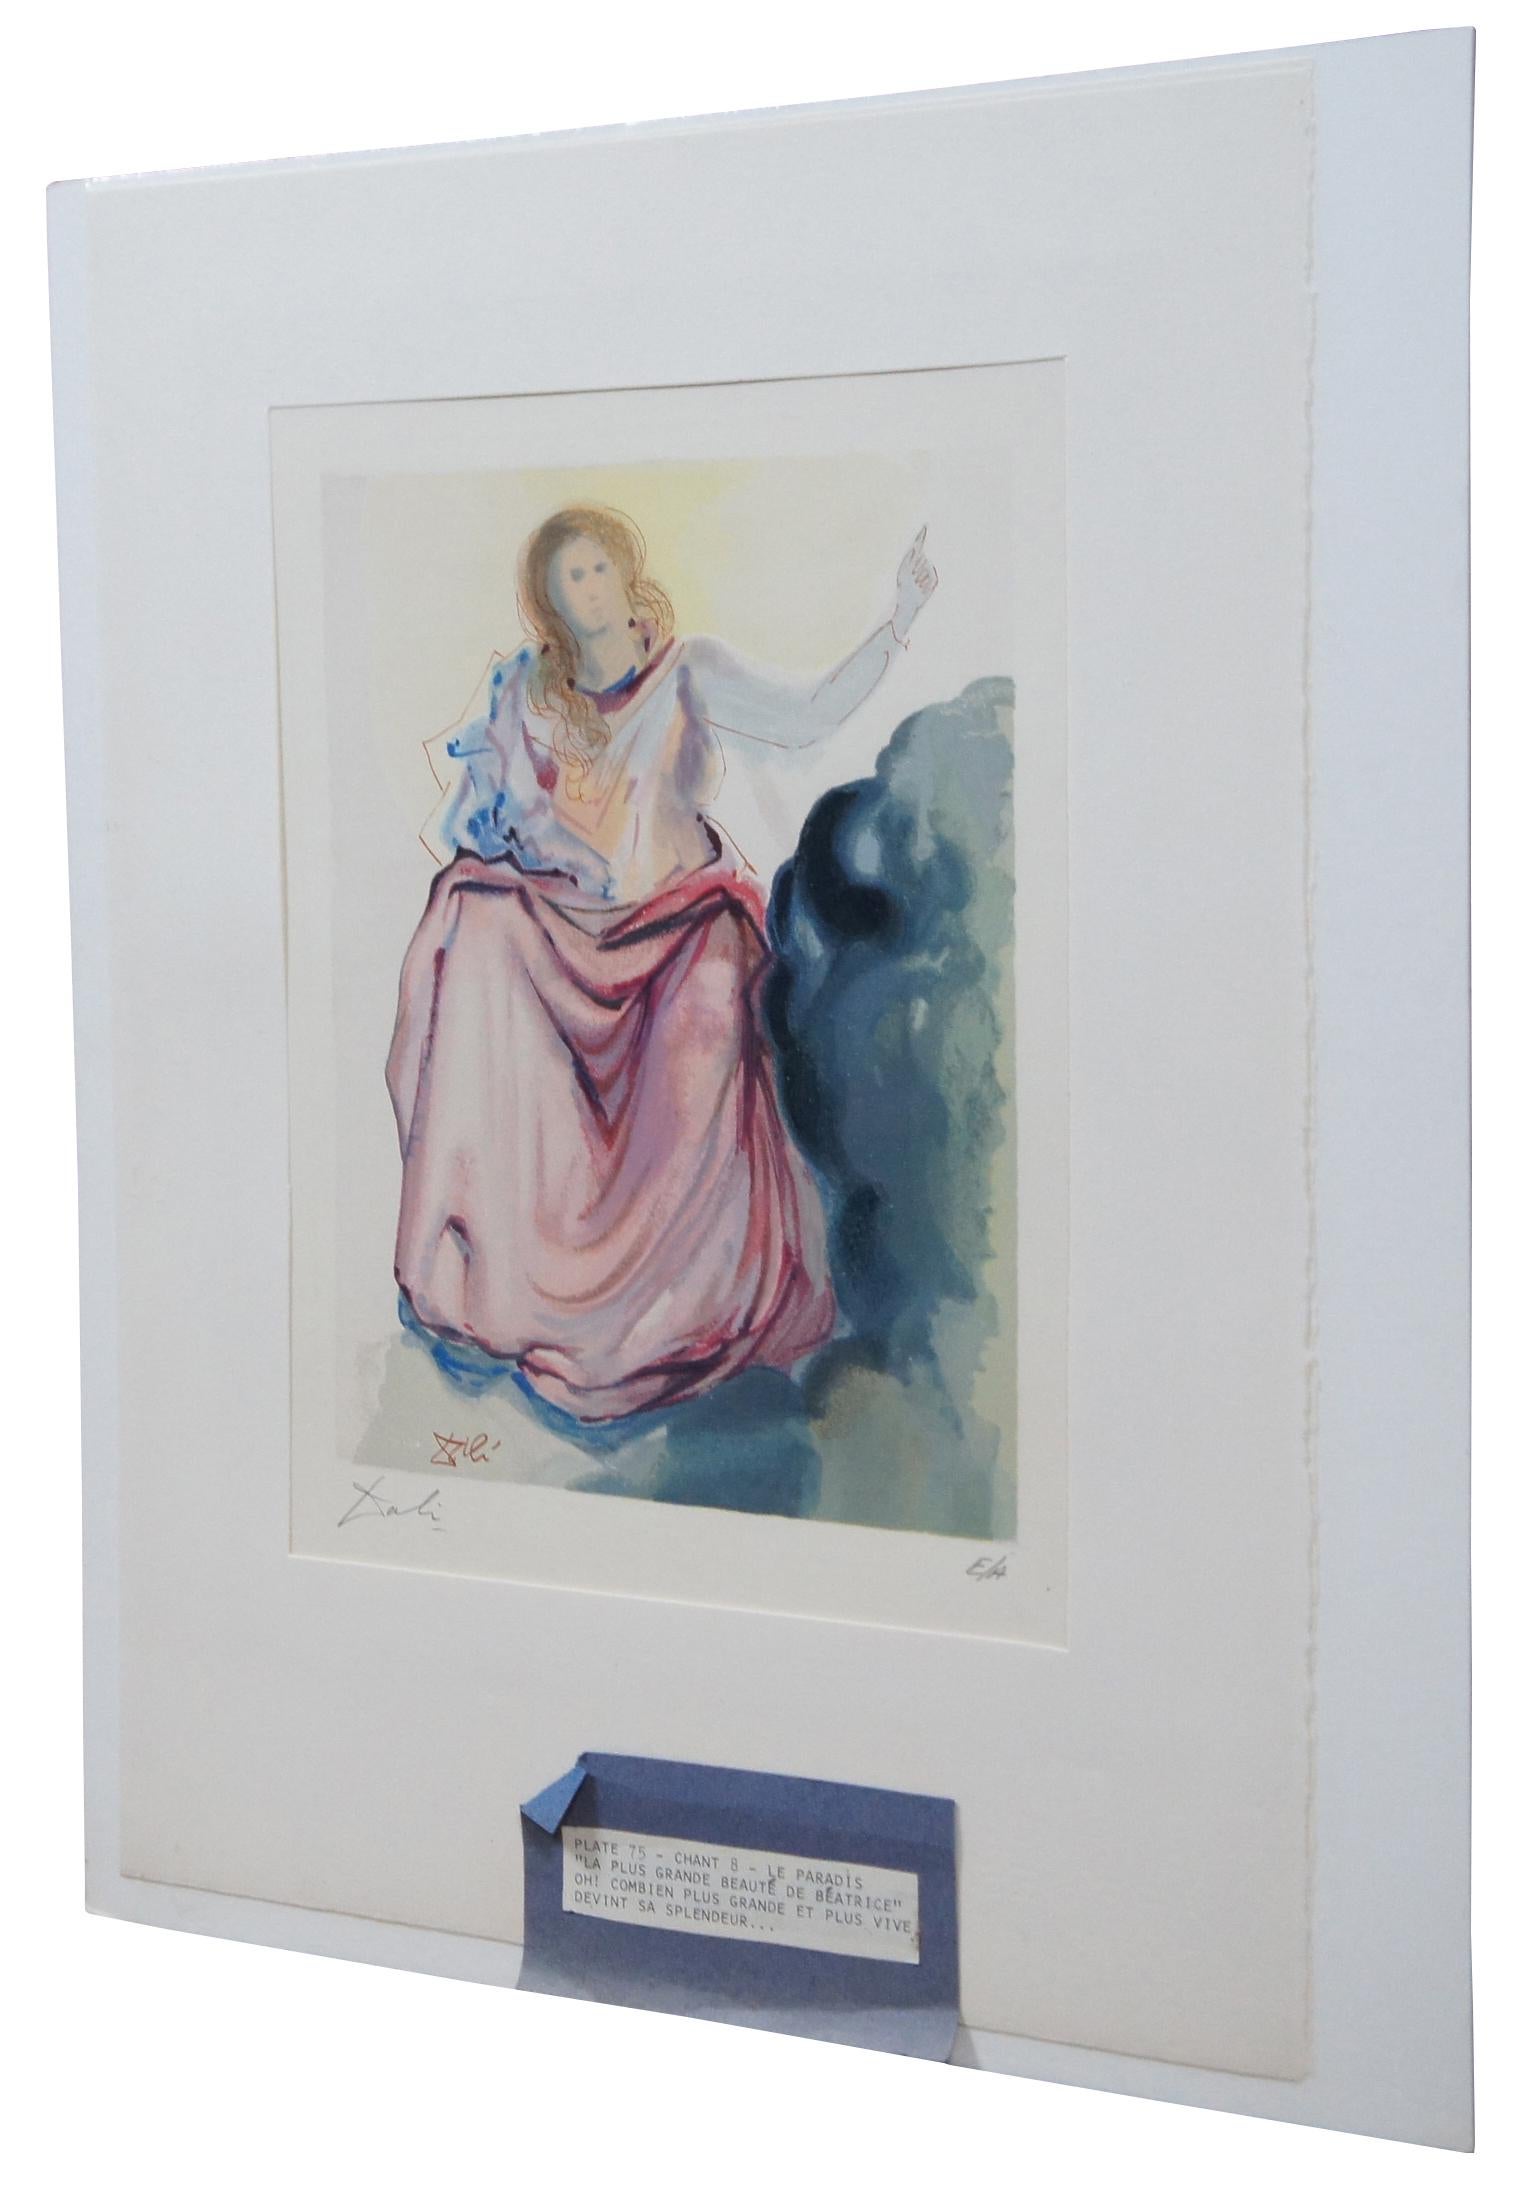 Original woodcut artist’s proof print, pencil signed by Salvador Dali – Plate 75 – Chant/Canto 8 – from Le Paradis (Paradise) – “La Plus Grande Beaute de Beatrice” (The Greatest Beauty of Beatrice) from the “Divine Comedie” series. Original